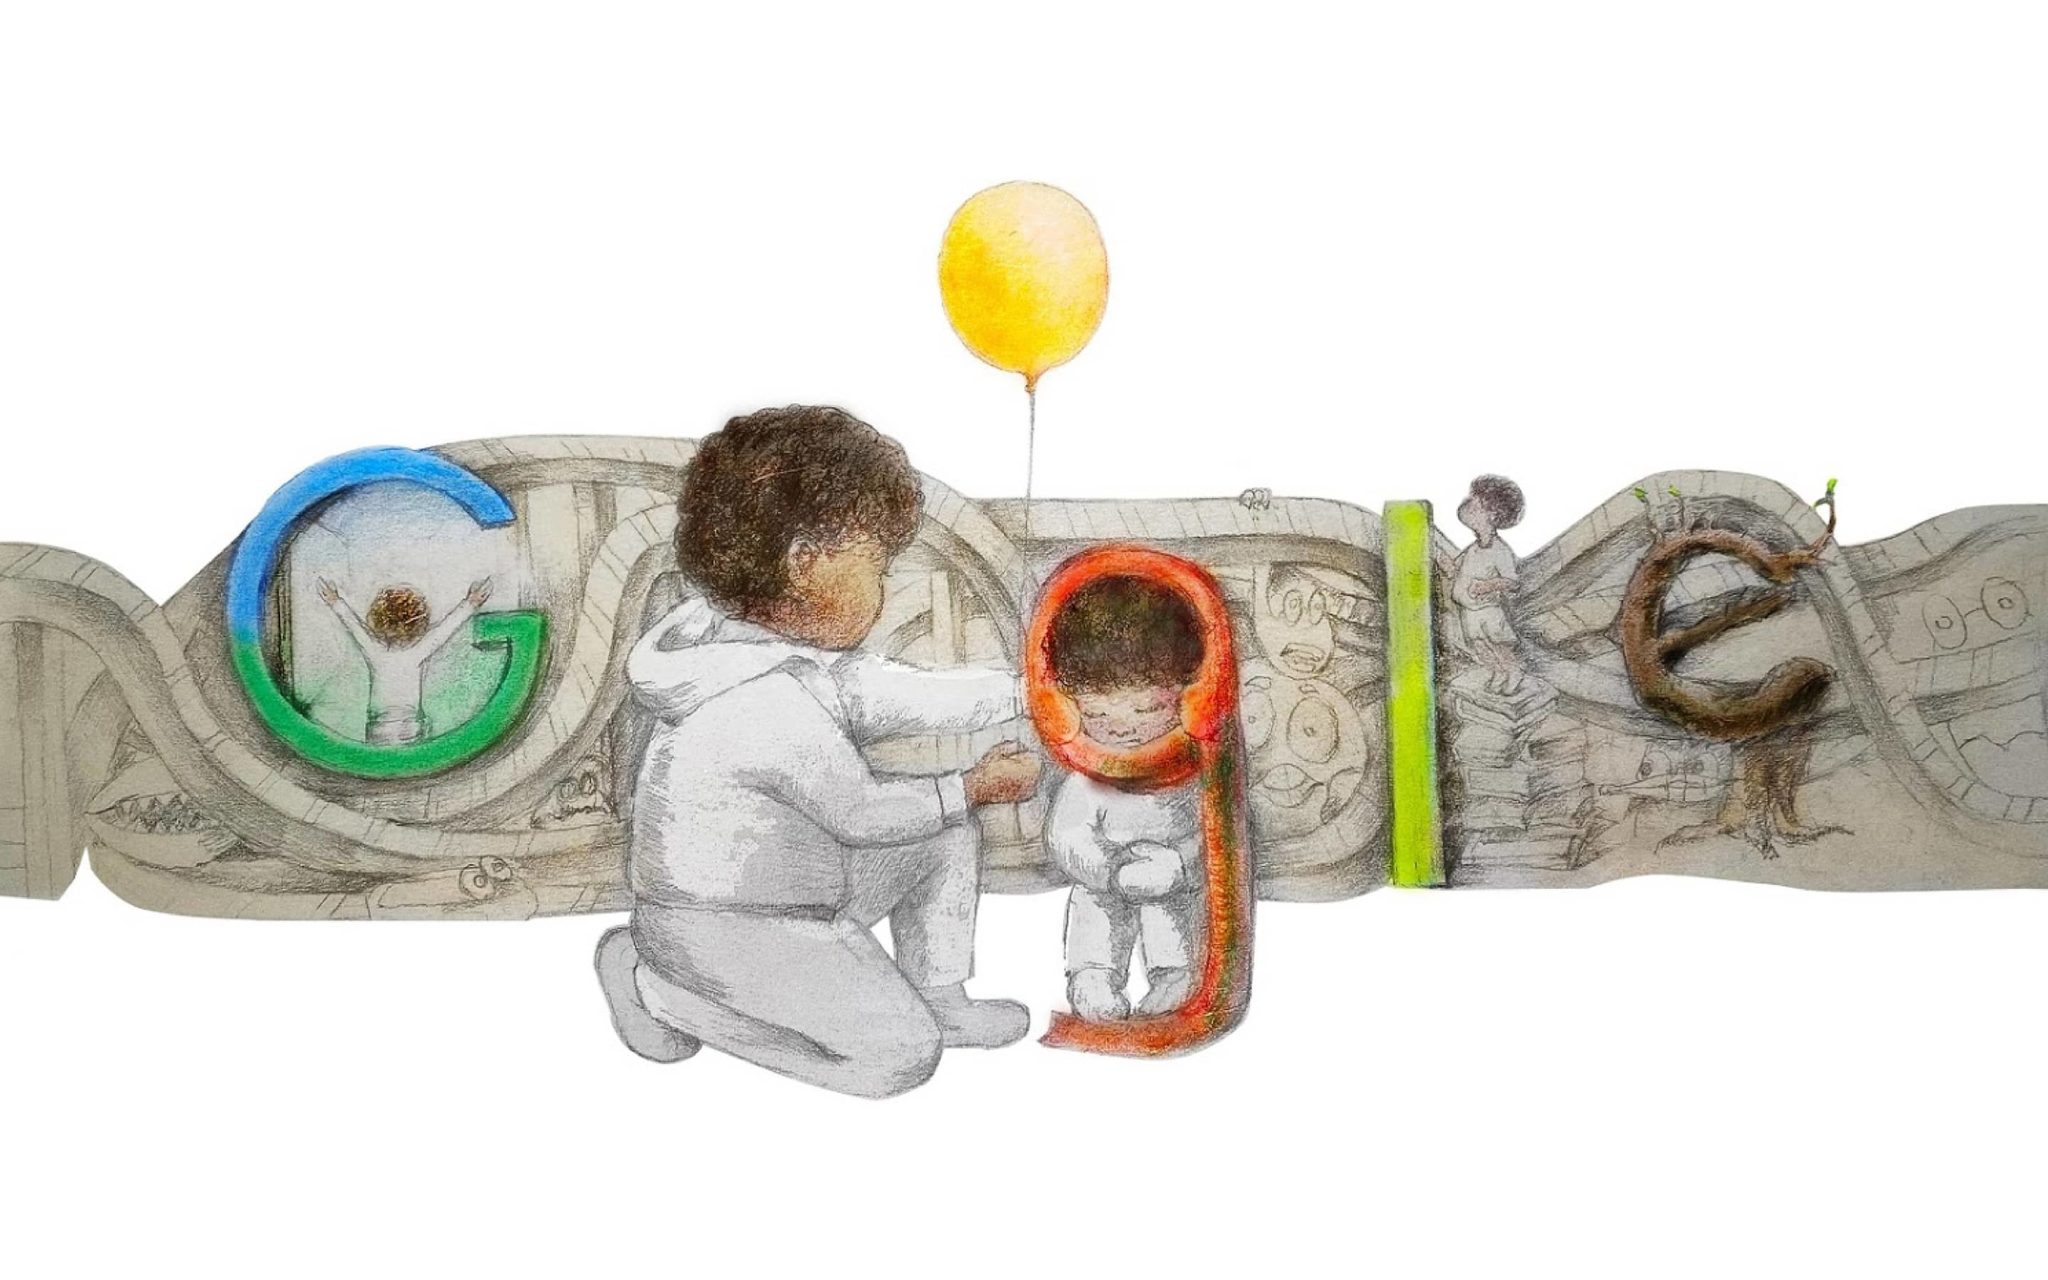 Kentucky student wins national Doodle for Google competition